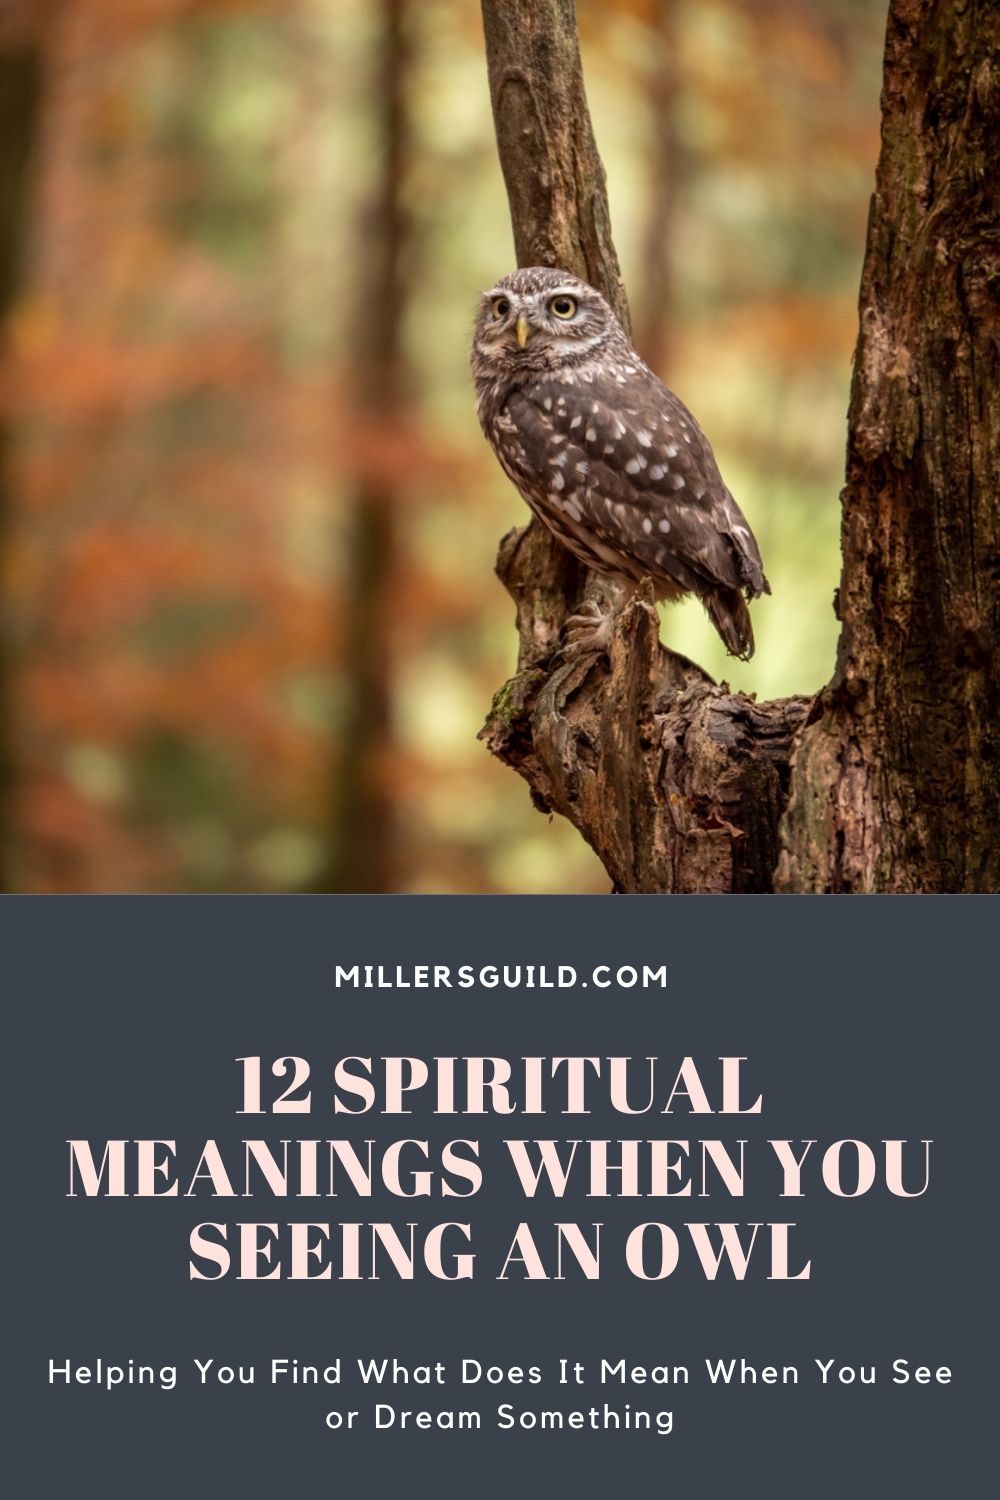 12 Spiritual Meanings When You Seeing an Owl 2